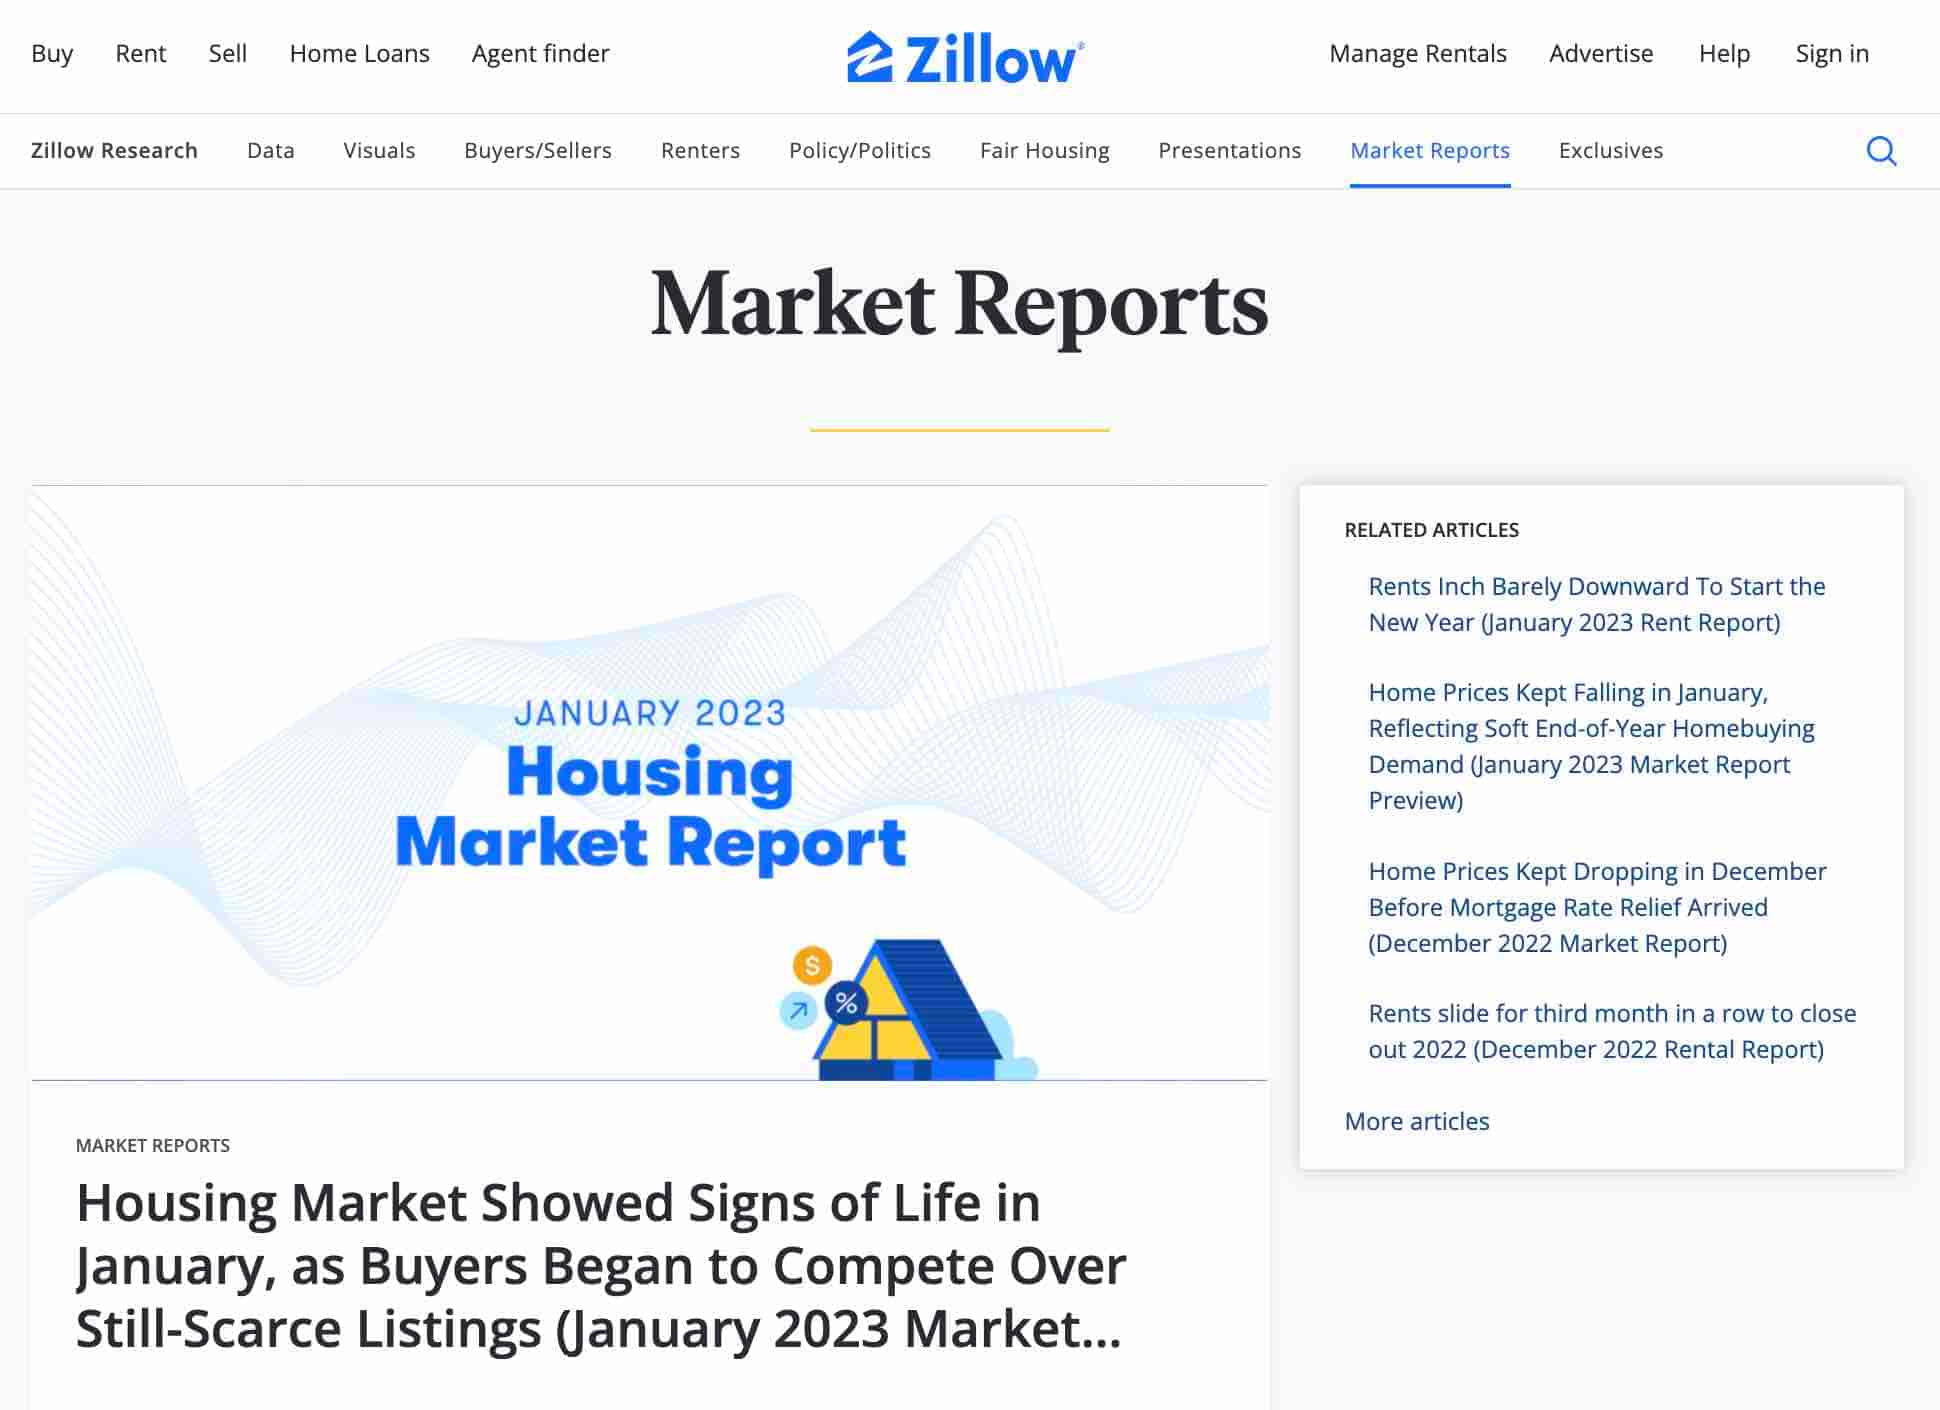 Real estate blog, Zillow